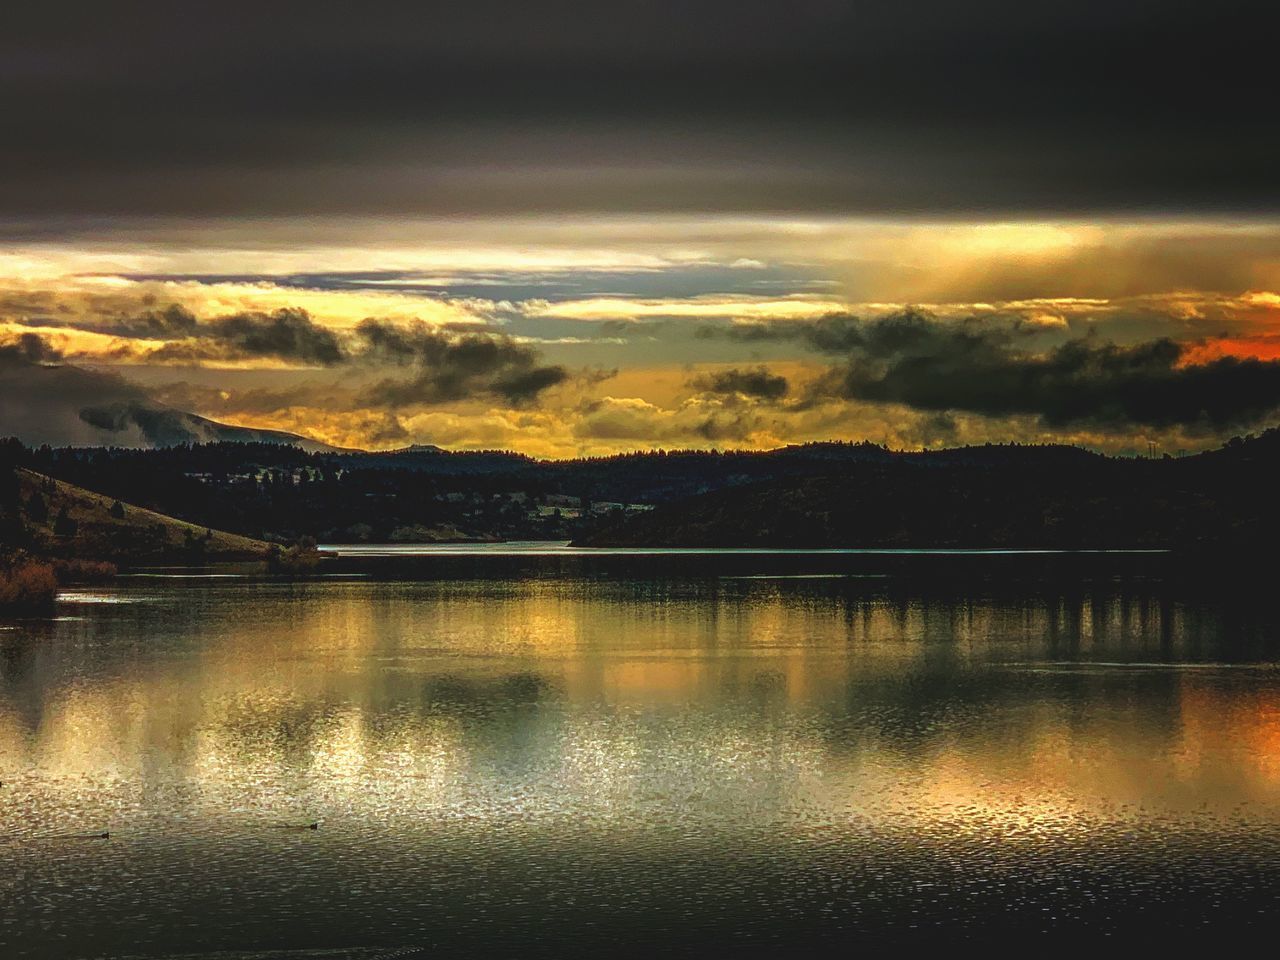 SCENIC VIEW OF DRAMATIC SKY OVER LAKE DURING SUNSET